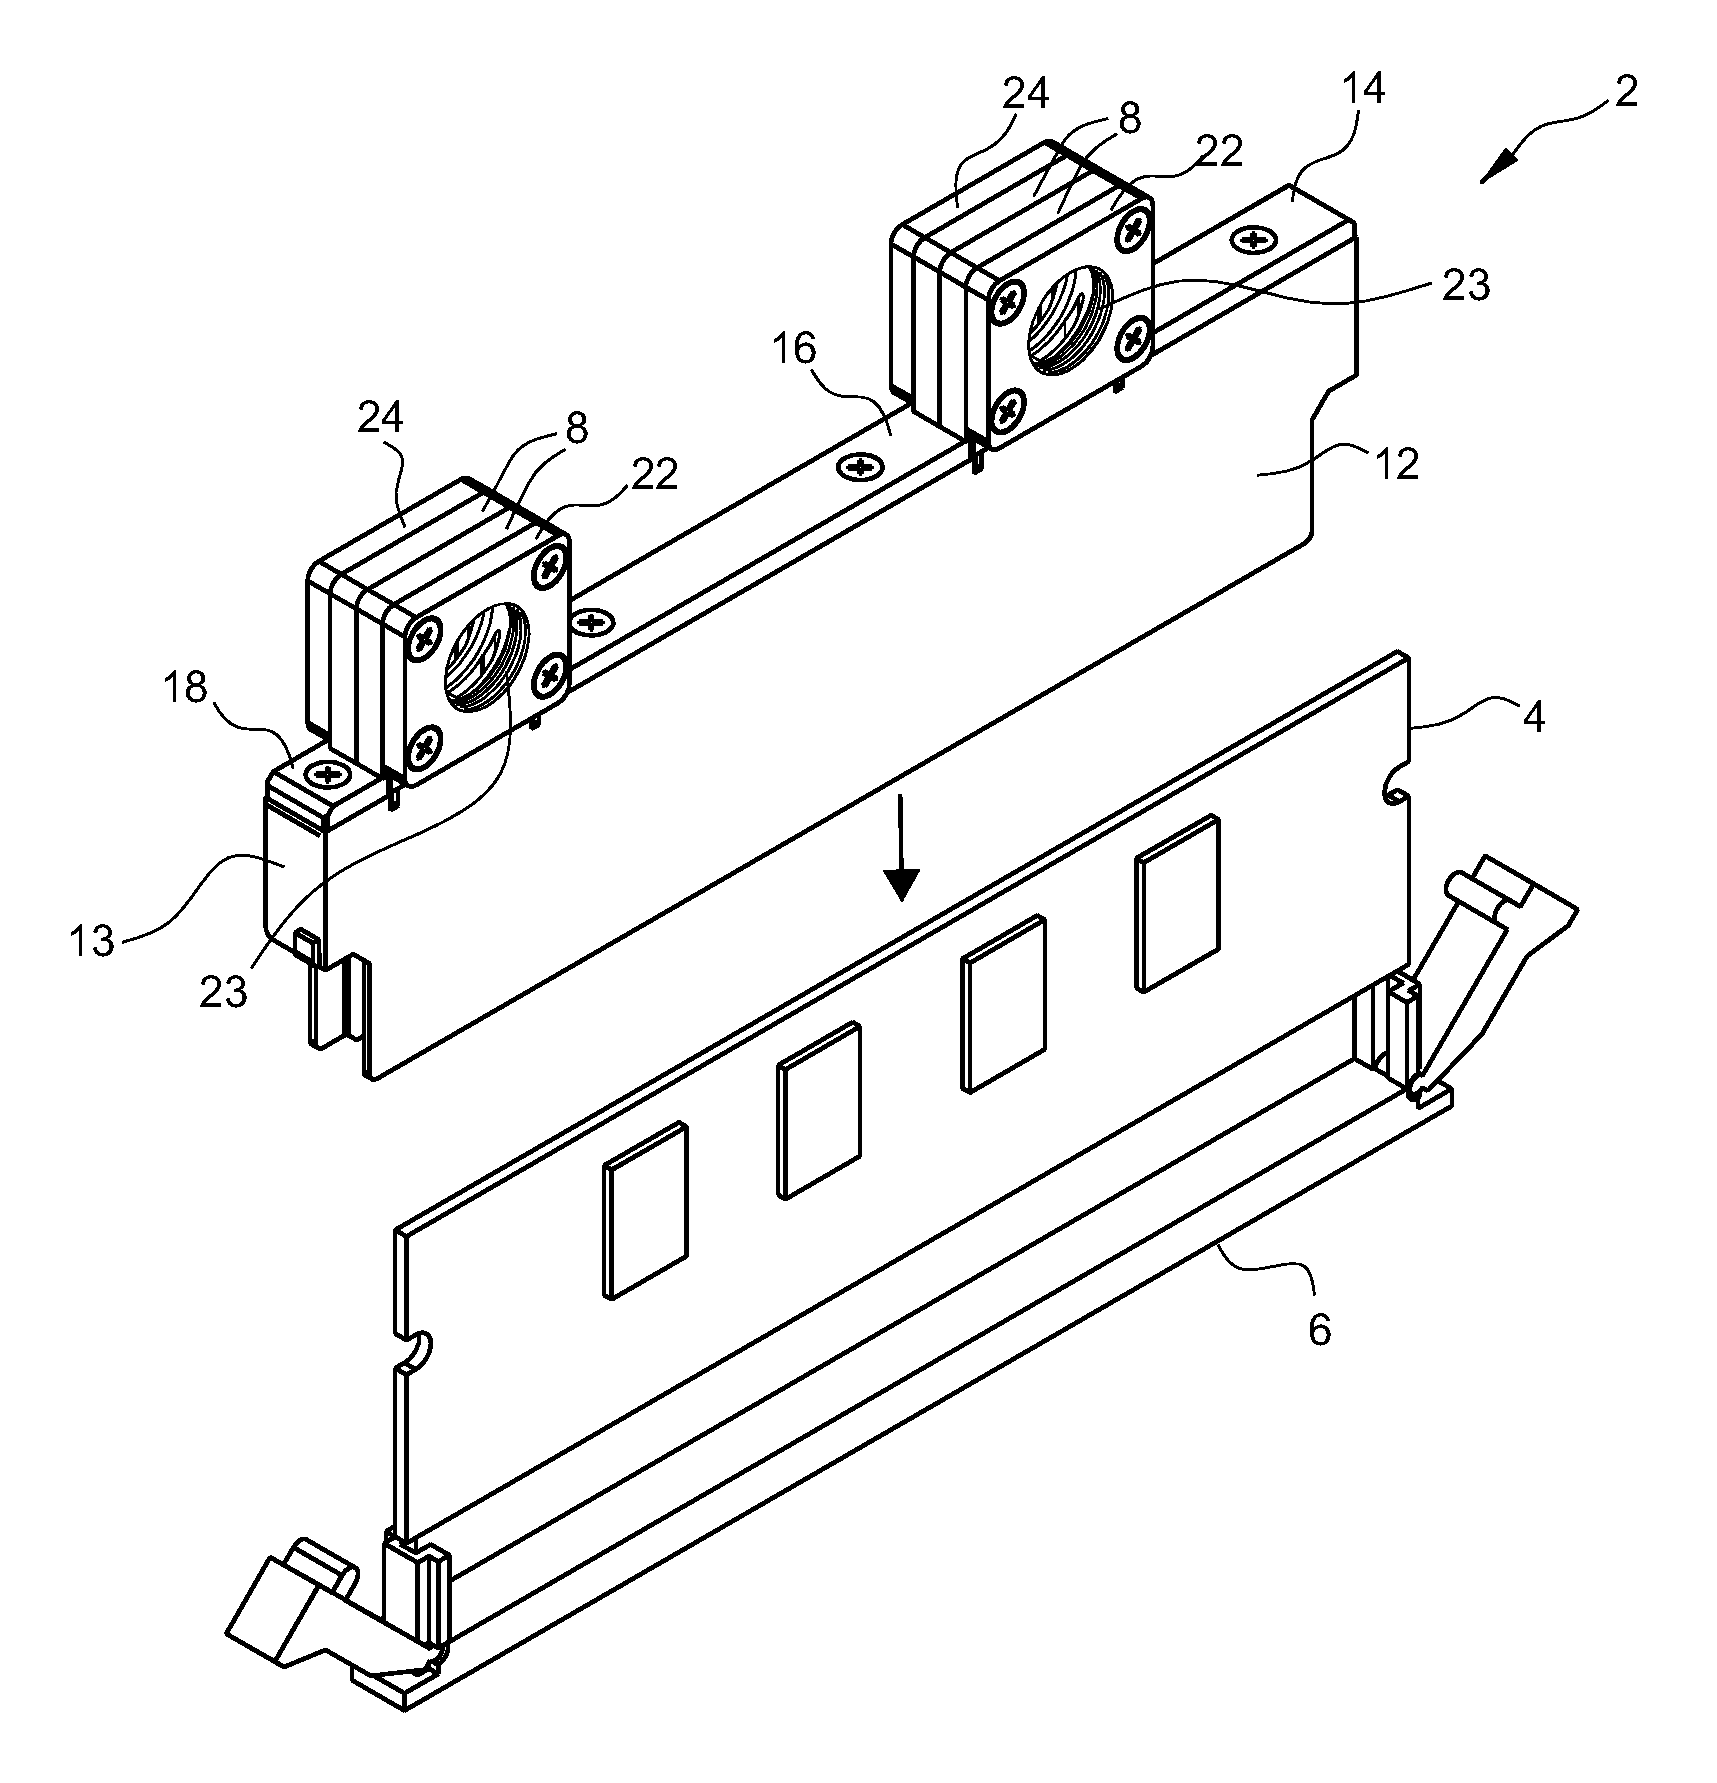 Cooler for spatially confined cooling